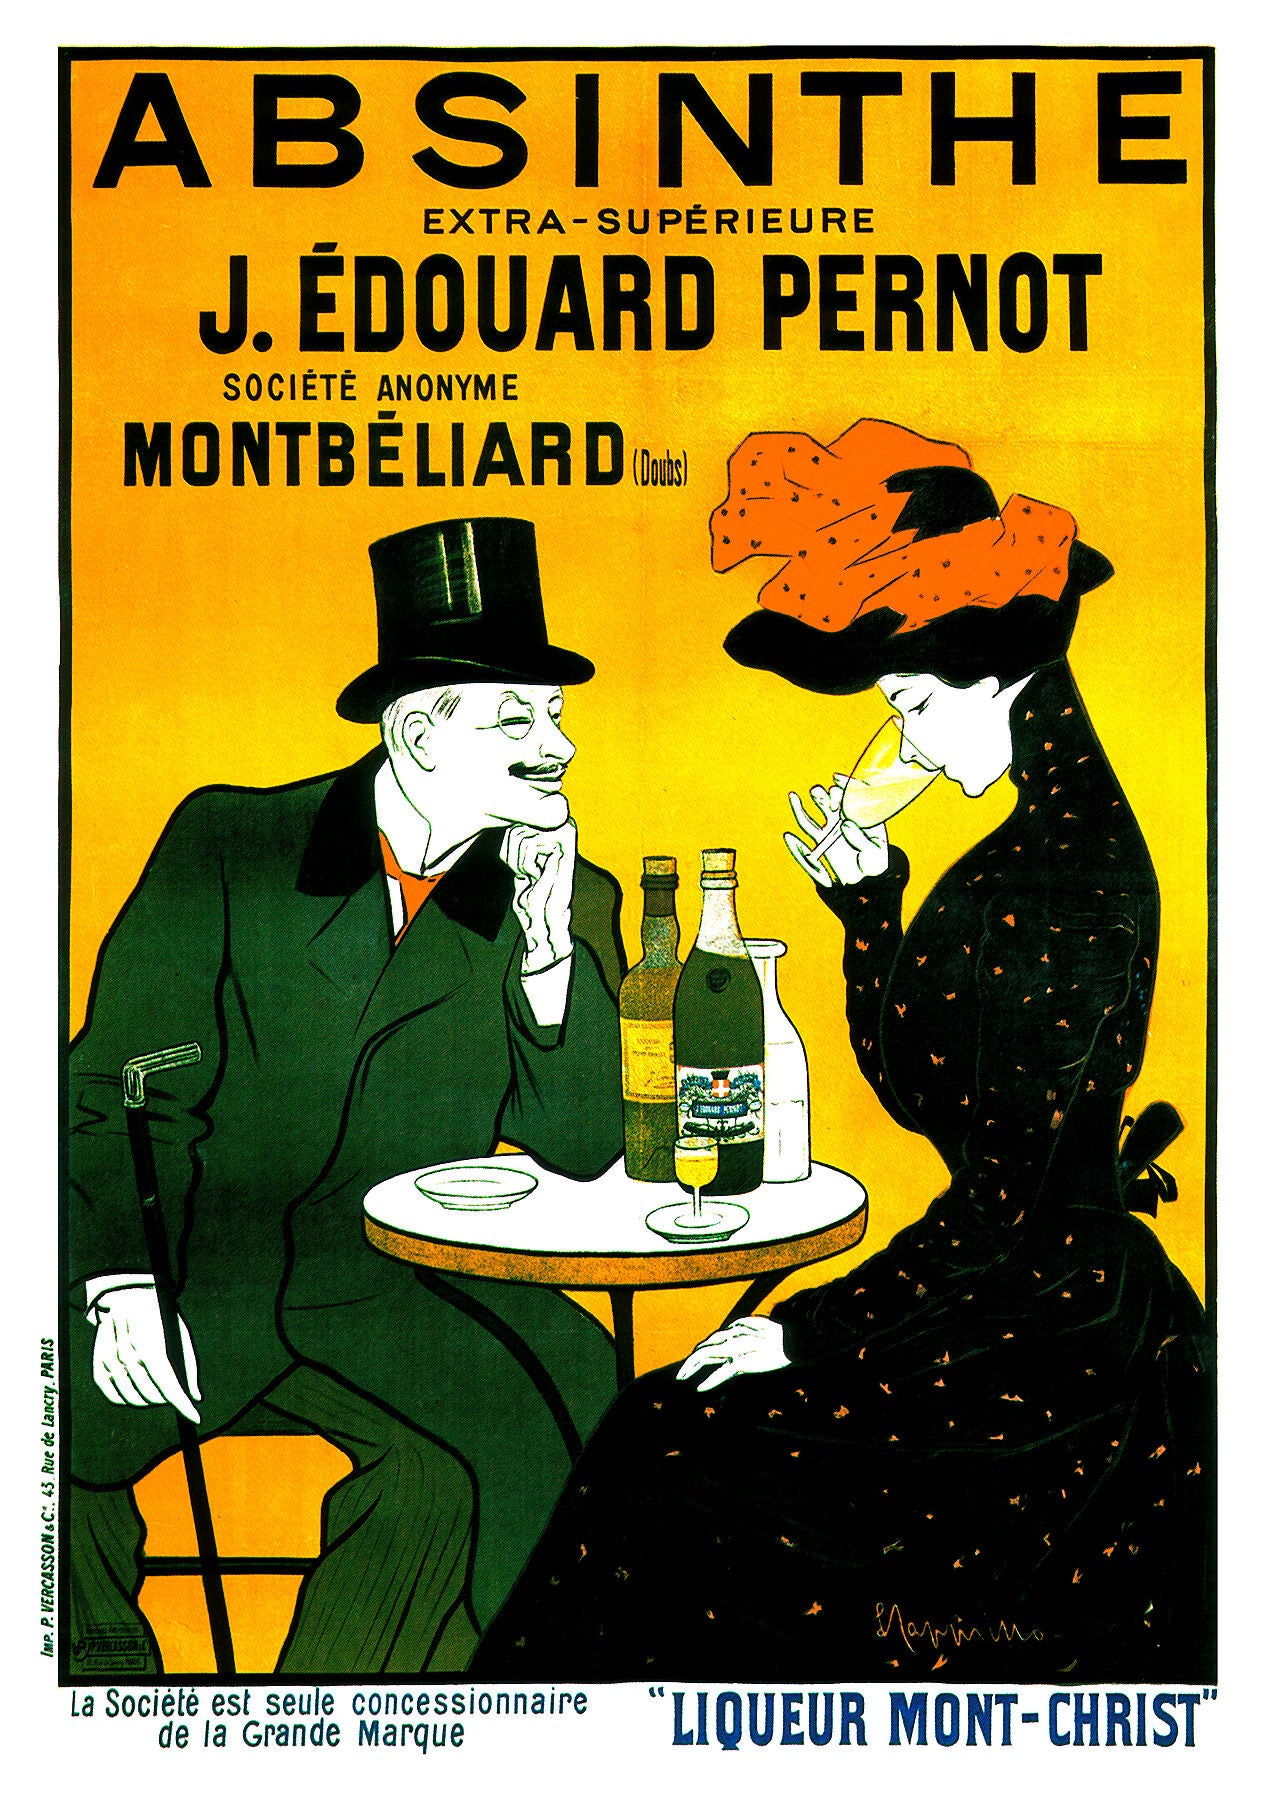 Absinthe J Édouard Pernot poster by Leonetto Cappiello